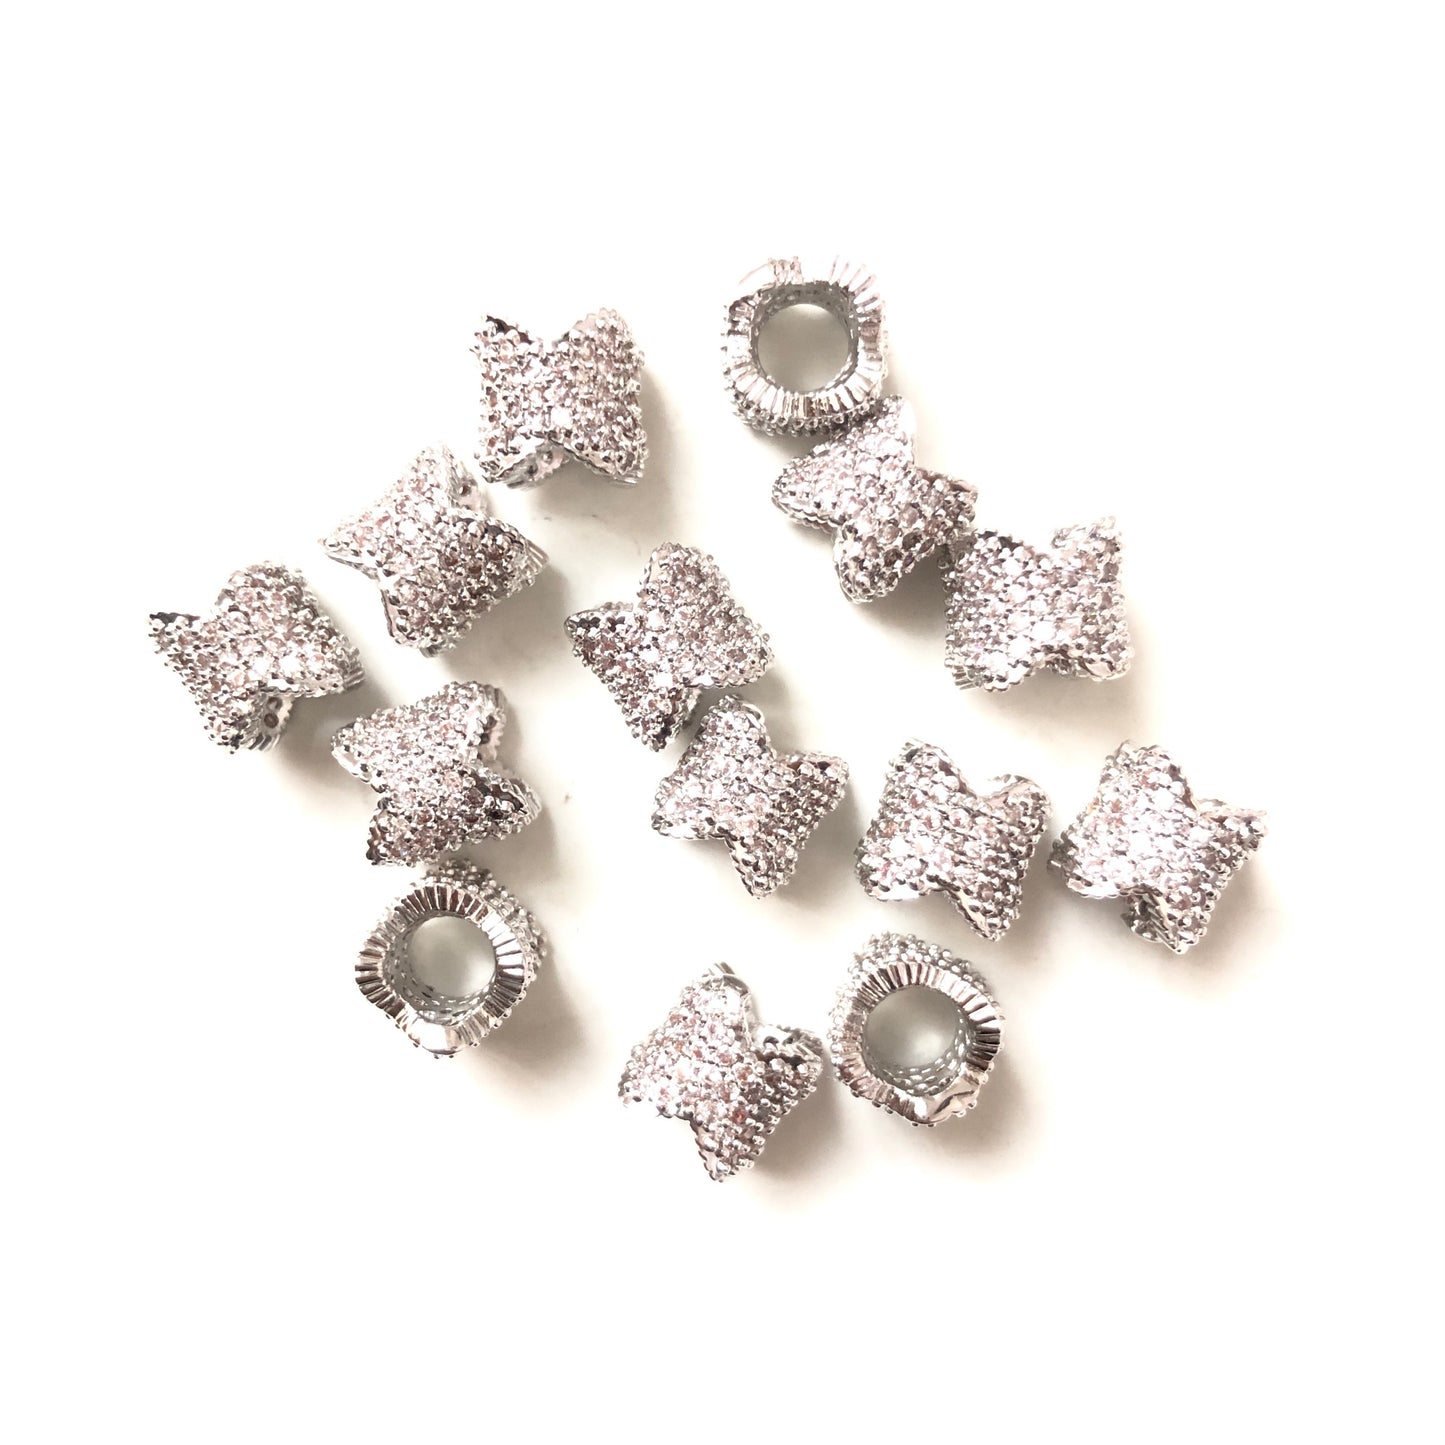 20pcs/lot 8*6.8mm CZ Paved Flower Tube Spacers Silver CZ Paved Spacers Tube Bar Centerpieces Charms Beads Beyond